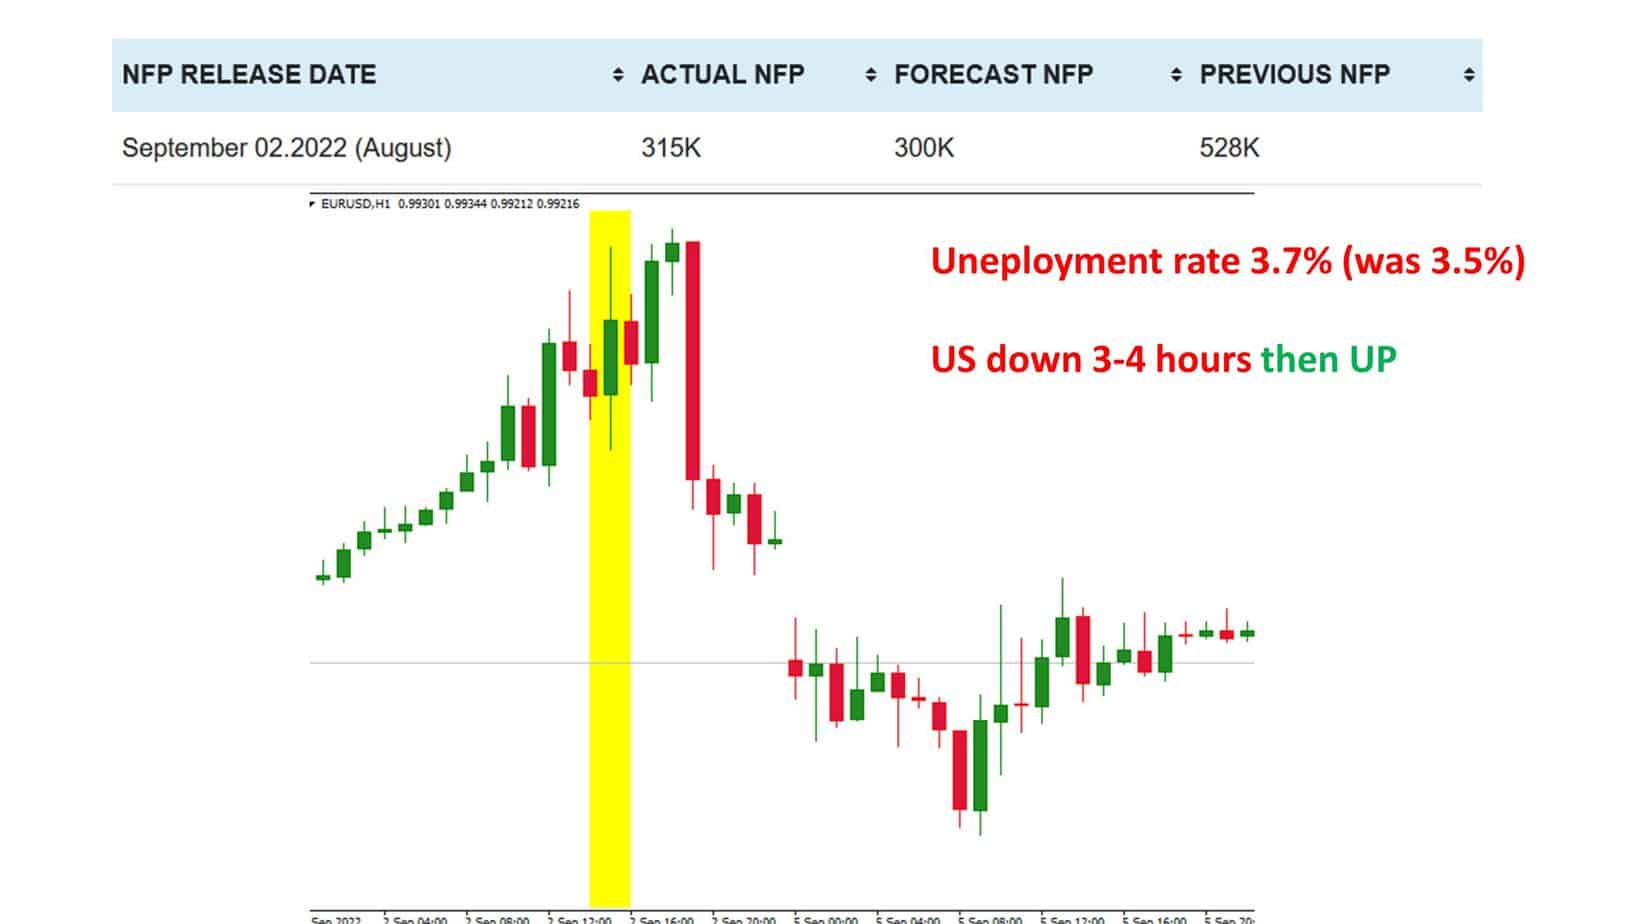 EURUSd price decline after NFP release